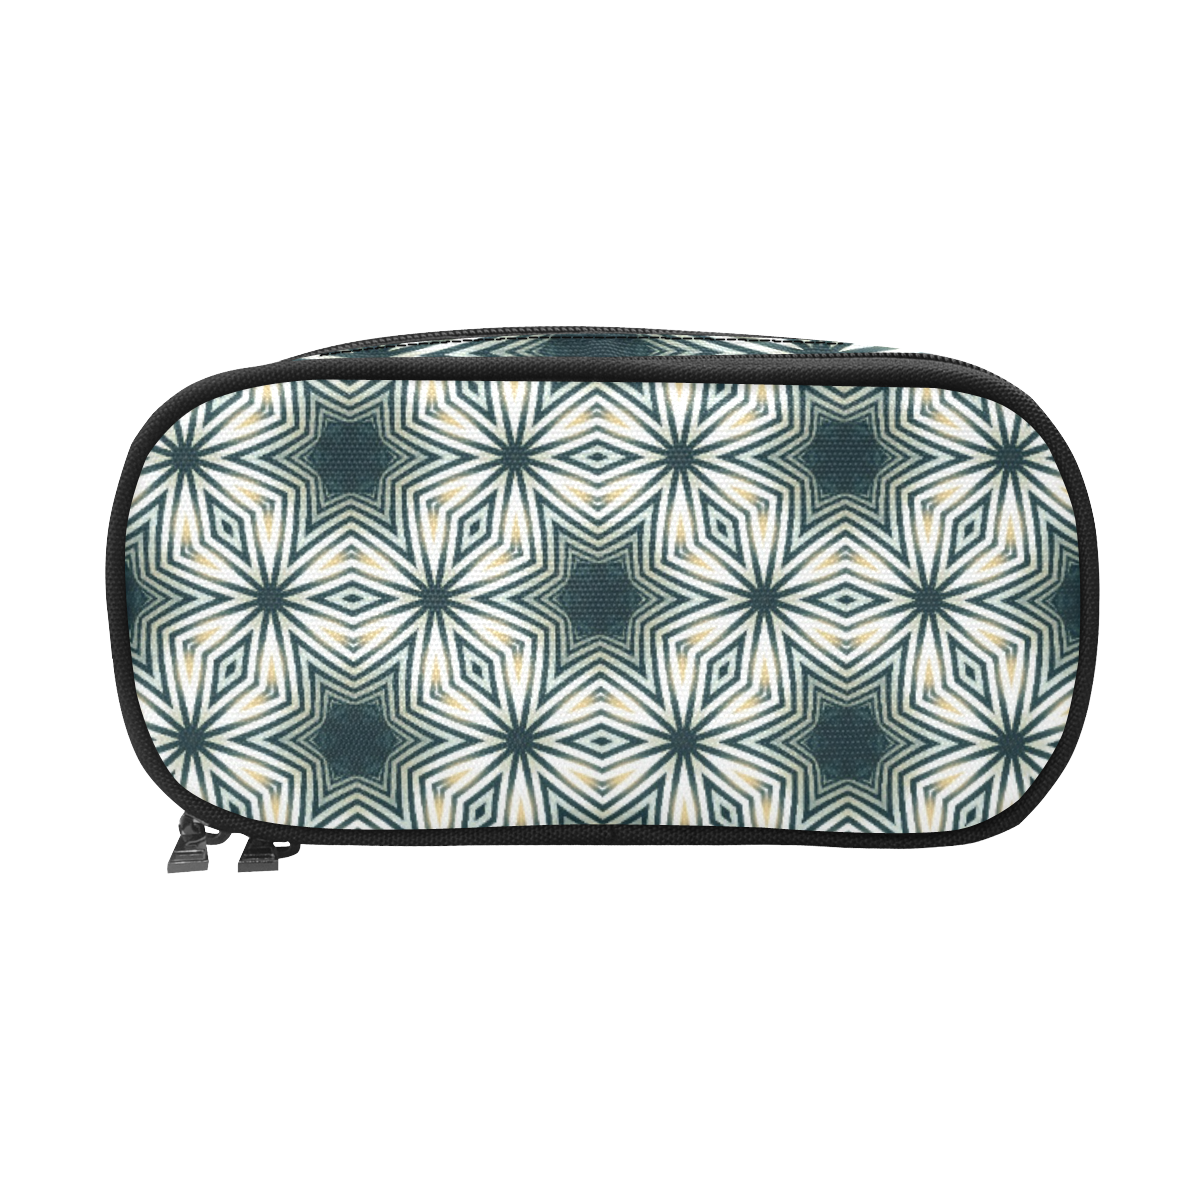 Star Zebra abstract pattern Pencil Pouch/Large (Model 1680)